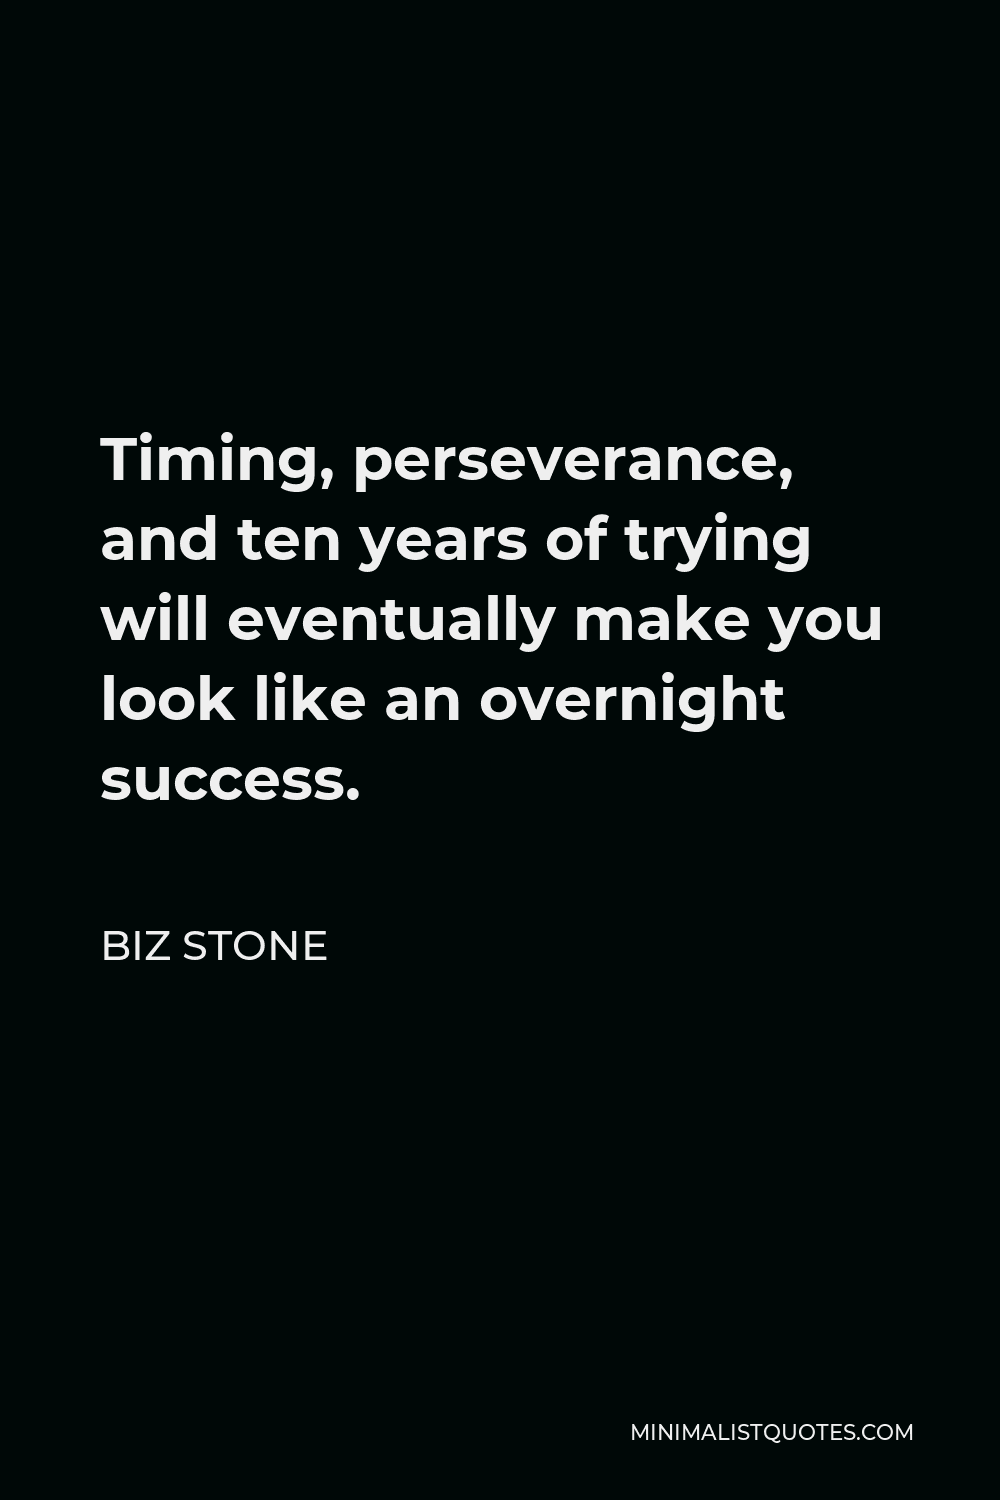 Biz Stone Quote - Timing, perseverance, and ten years of trying will eventually make you look like an overnight success.